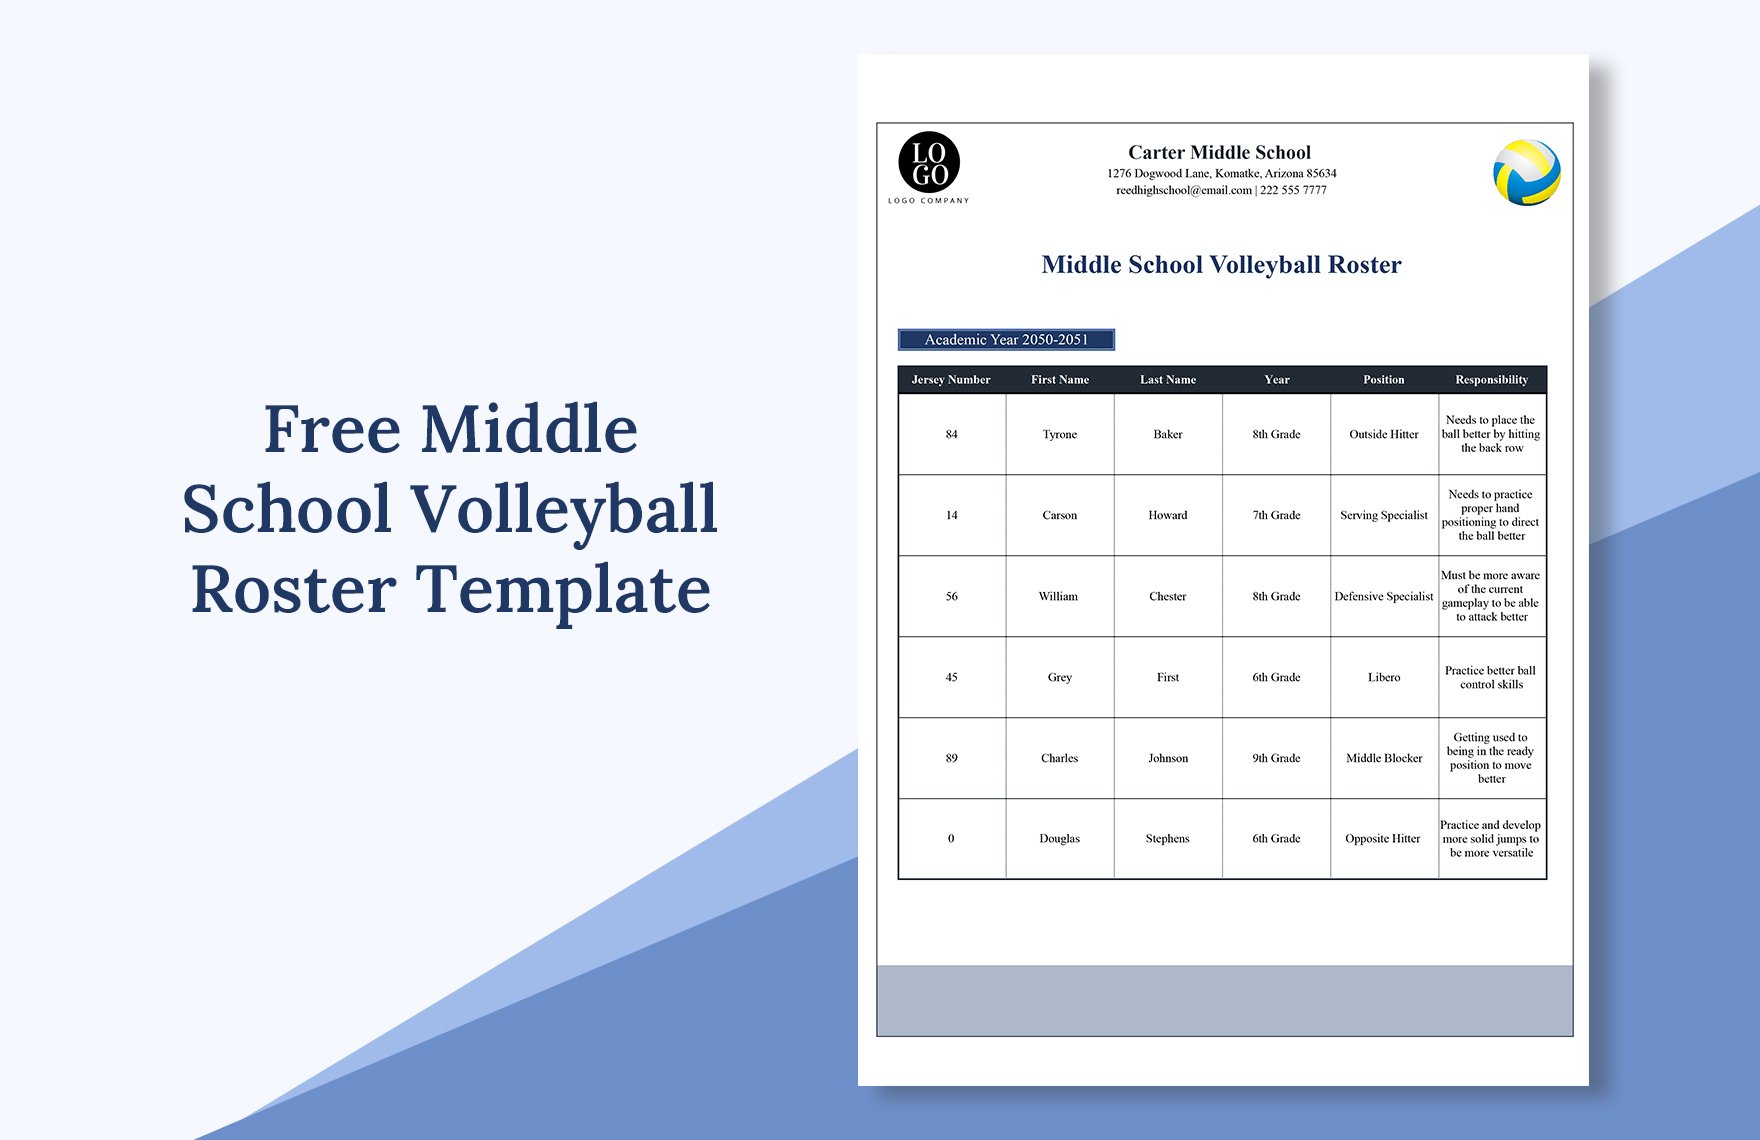 Middle School Volleyball Roster Template